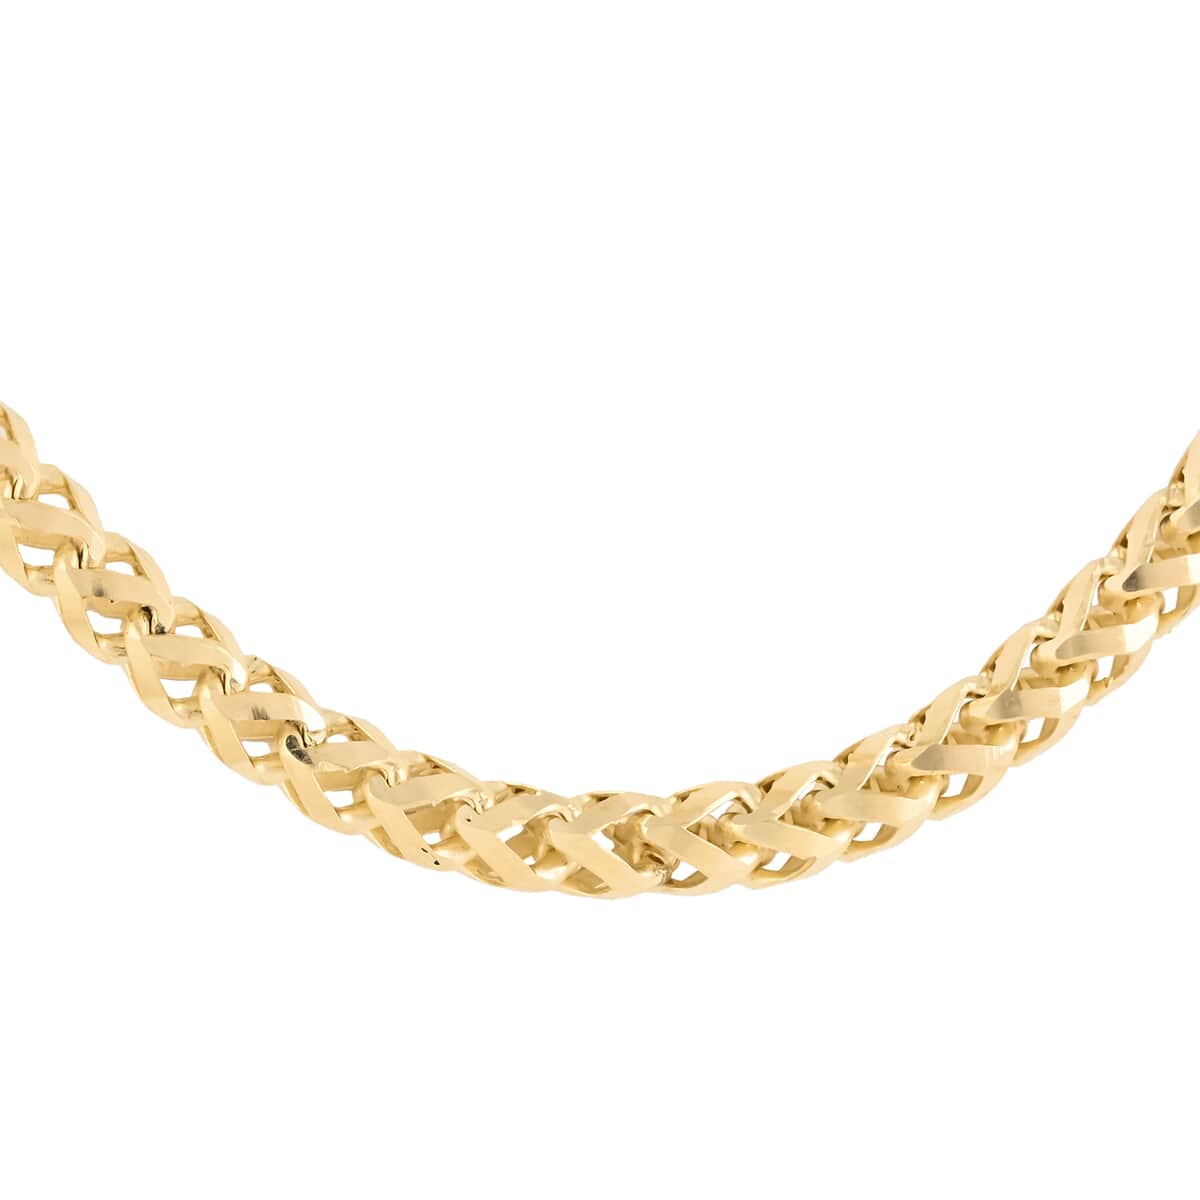 California Closeout Deal 10K Yellow Gold 5.8mm Round Diamond-Cut Necklace 20 Inches 30.60 Grams image number 2